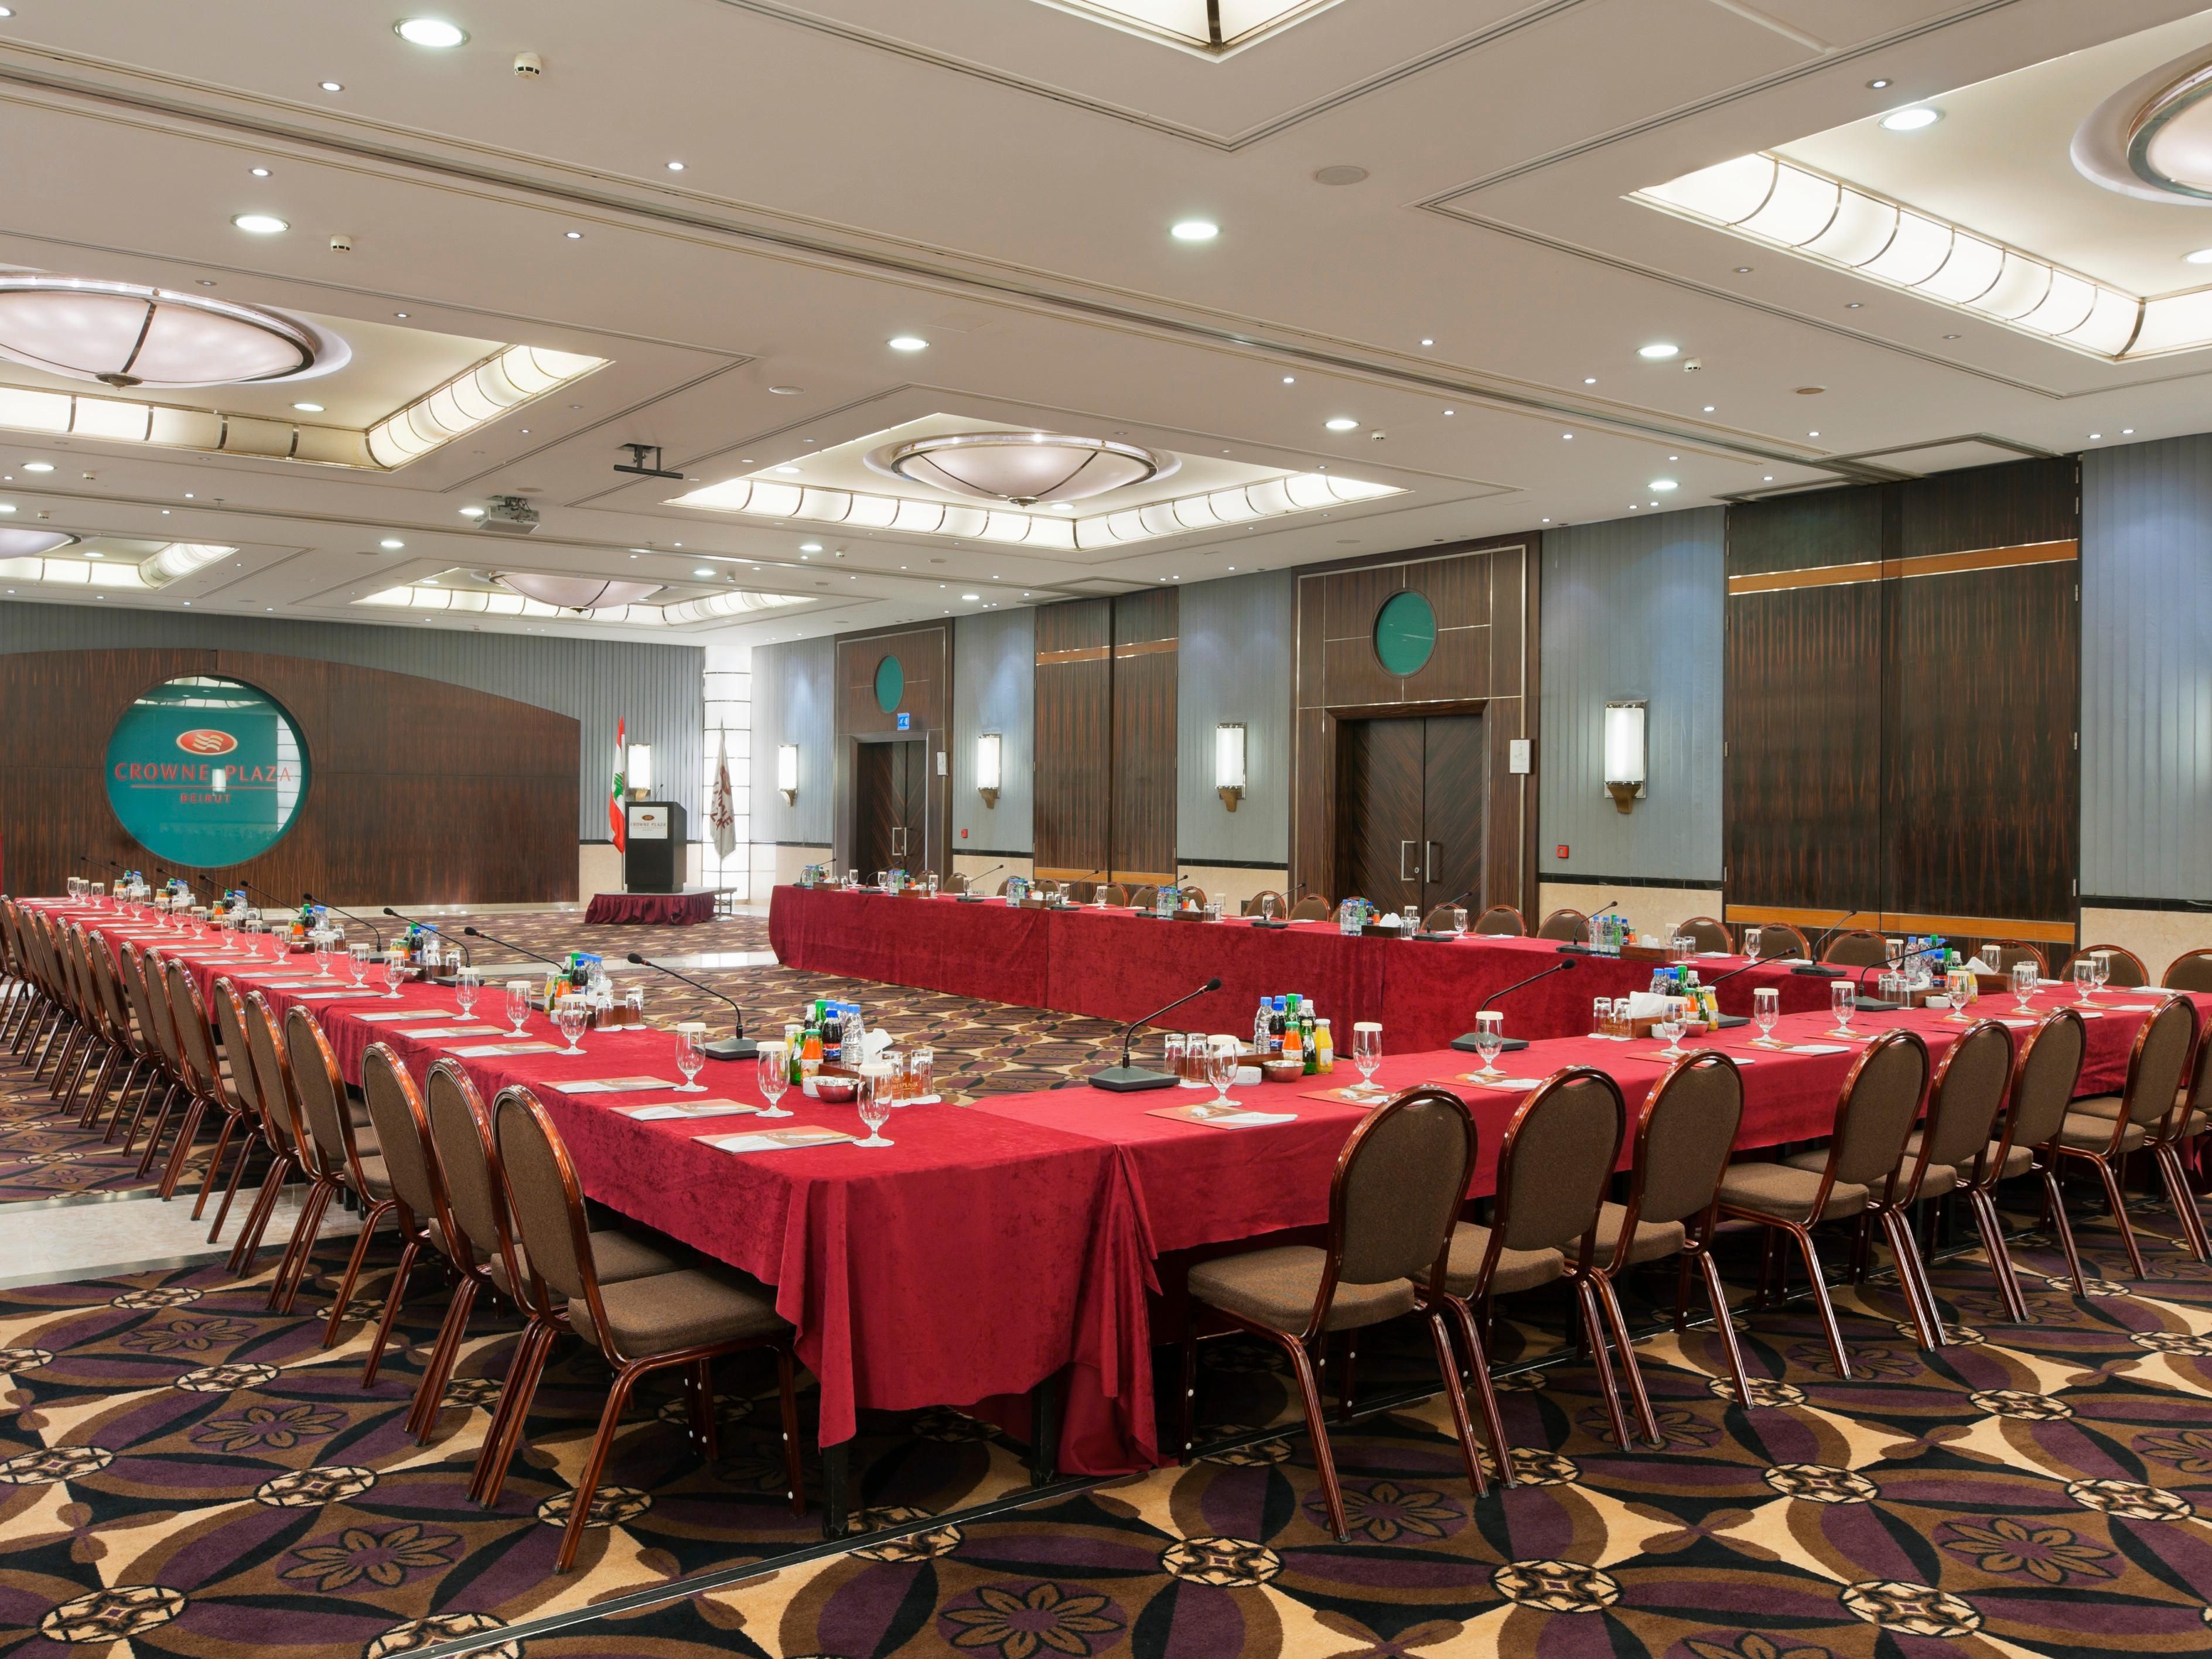 With 988 square meters of flexible function space, the Crowne Plaza Beirut is the perfect setting for your events, offering catering for groups from 10- 600 persons.
With 9 naturally Day lit meeting Rooms and a business center located on 1st floor, they are easily accessible from the parking lot with an external panoramic elevator.